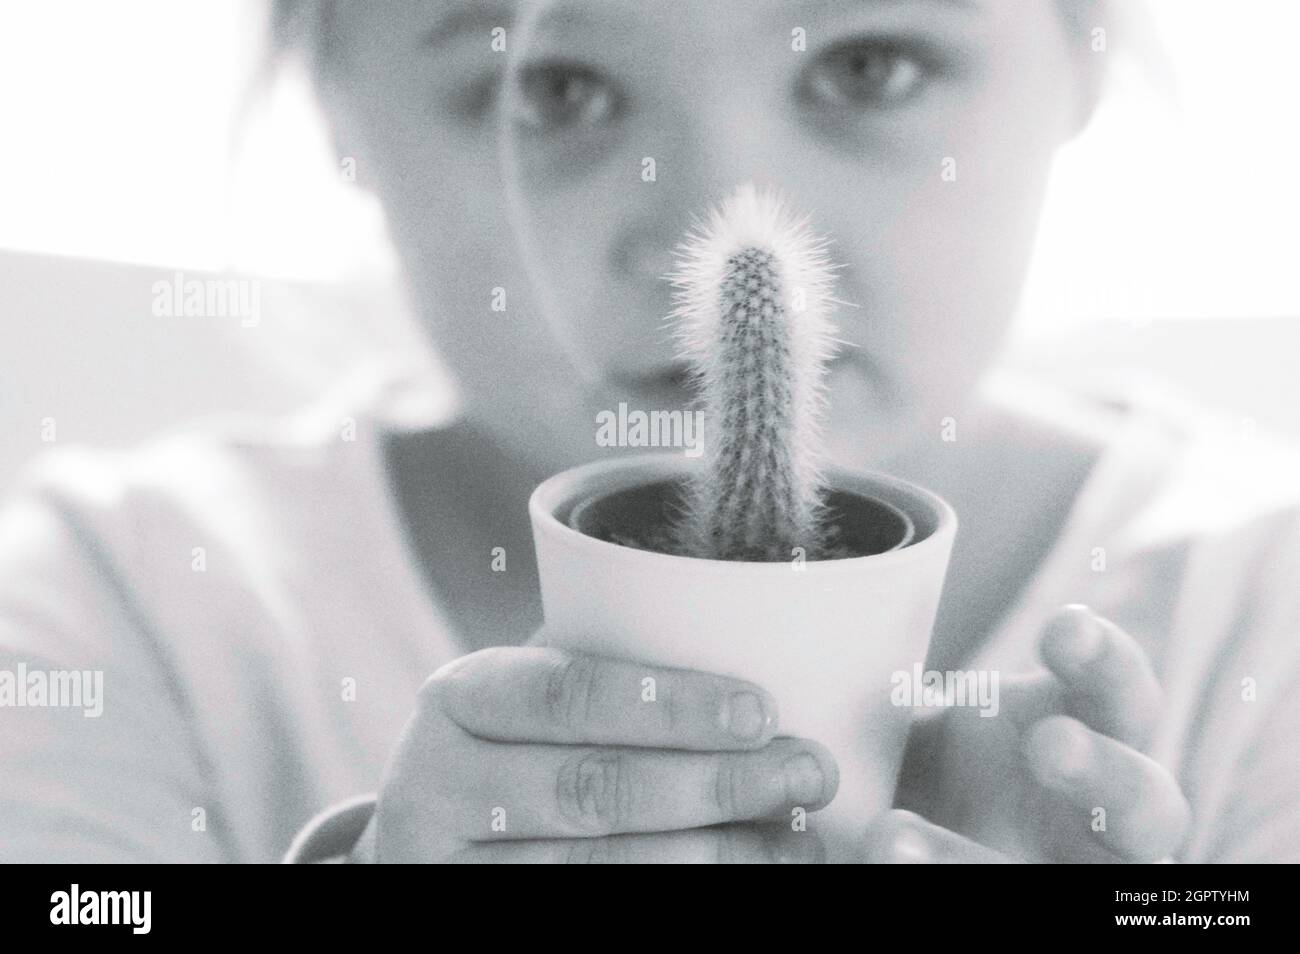 Girl Holding A Potted Cactus Stock Photo